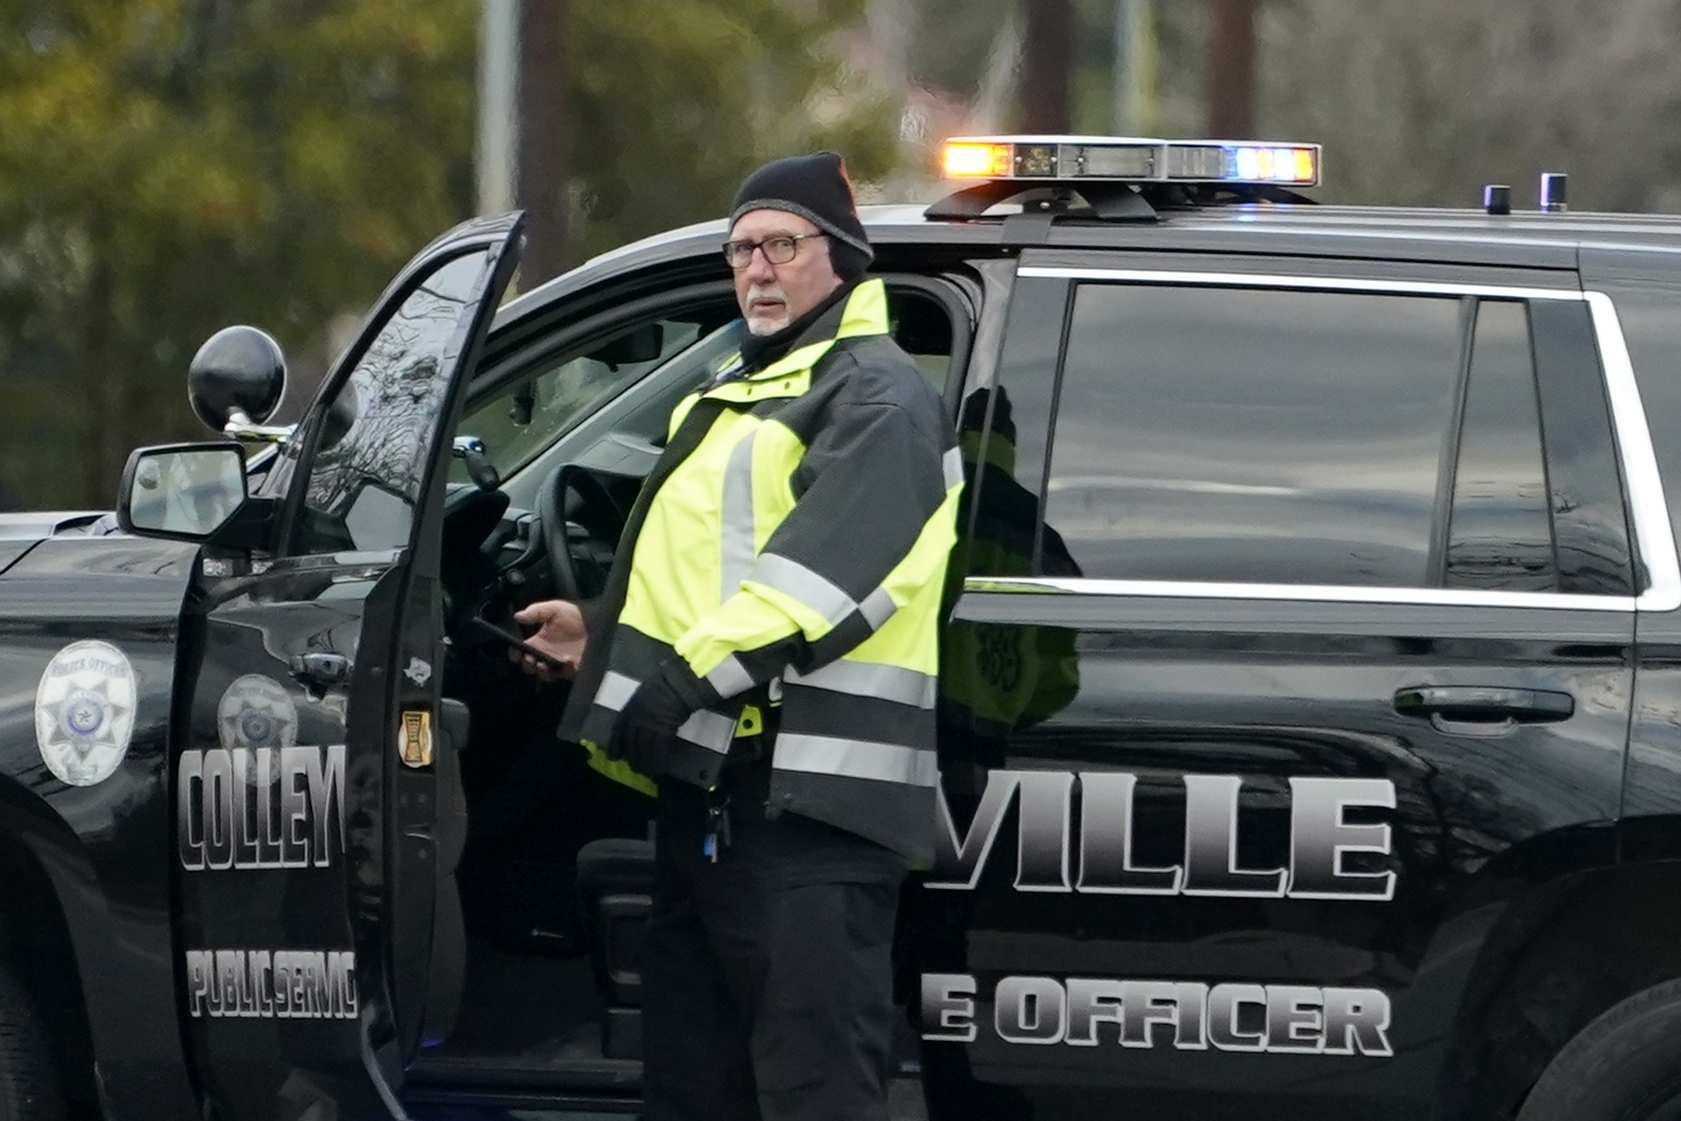 A law enforcement official stands patrol on a main road leading to Congregation Beth Israel synagogue where a man had held hostages for hours on Saturday, Jan. 15, 2022, in Colleyville, Texas. (AP Photo/Tony Gutierrez)